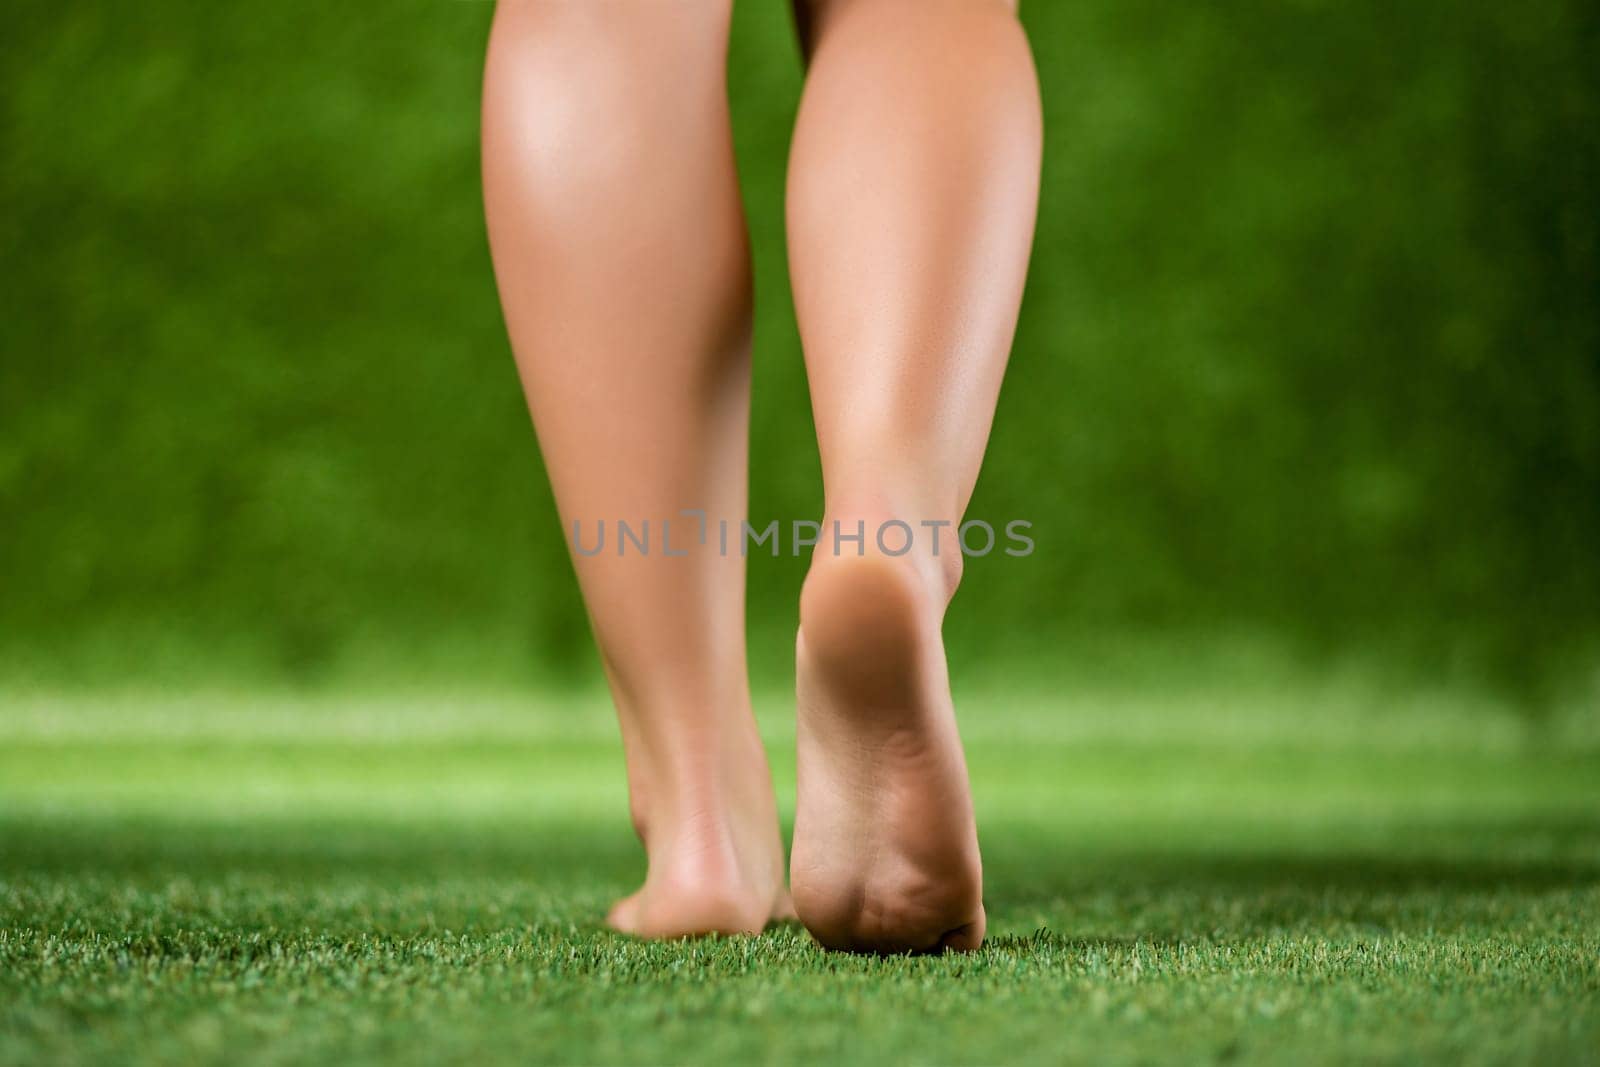 His bare feet beautiful woman close up are on a grass